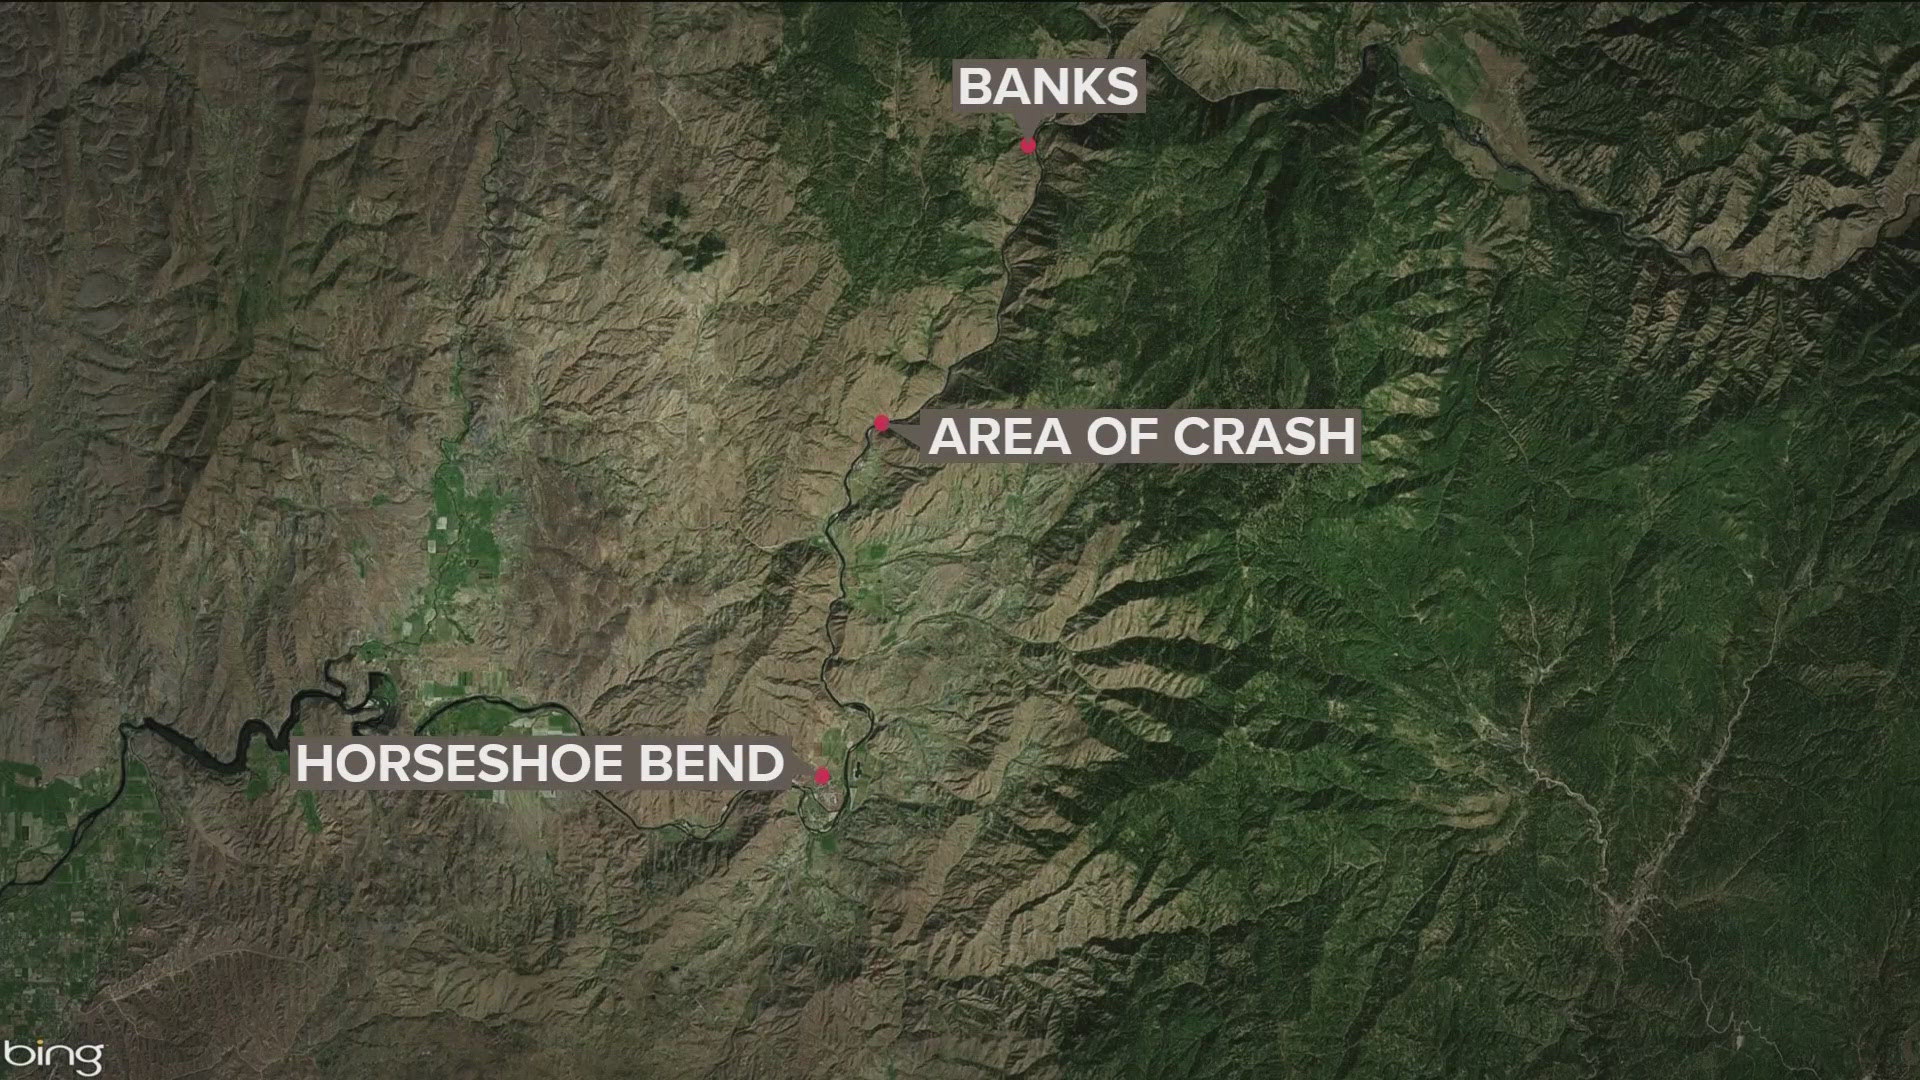 The Boise County Sheriff's Office confirmed the crash, but injuries are unknown. The highway is open, however, traffic is still backed up.